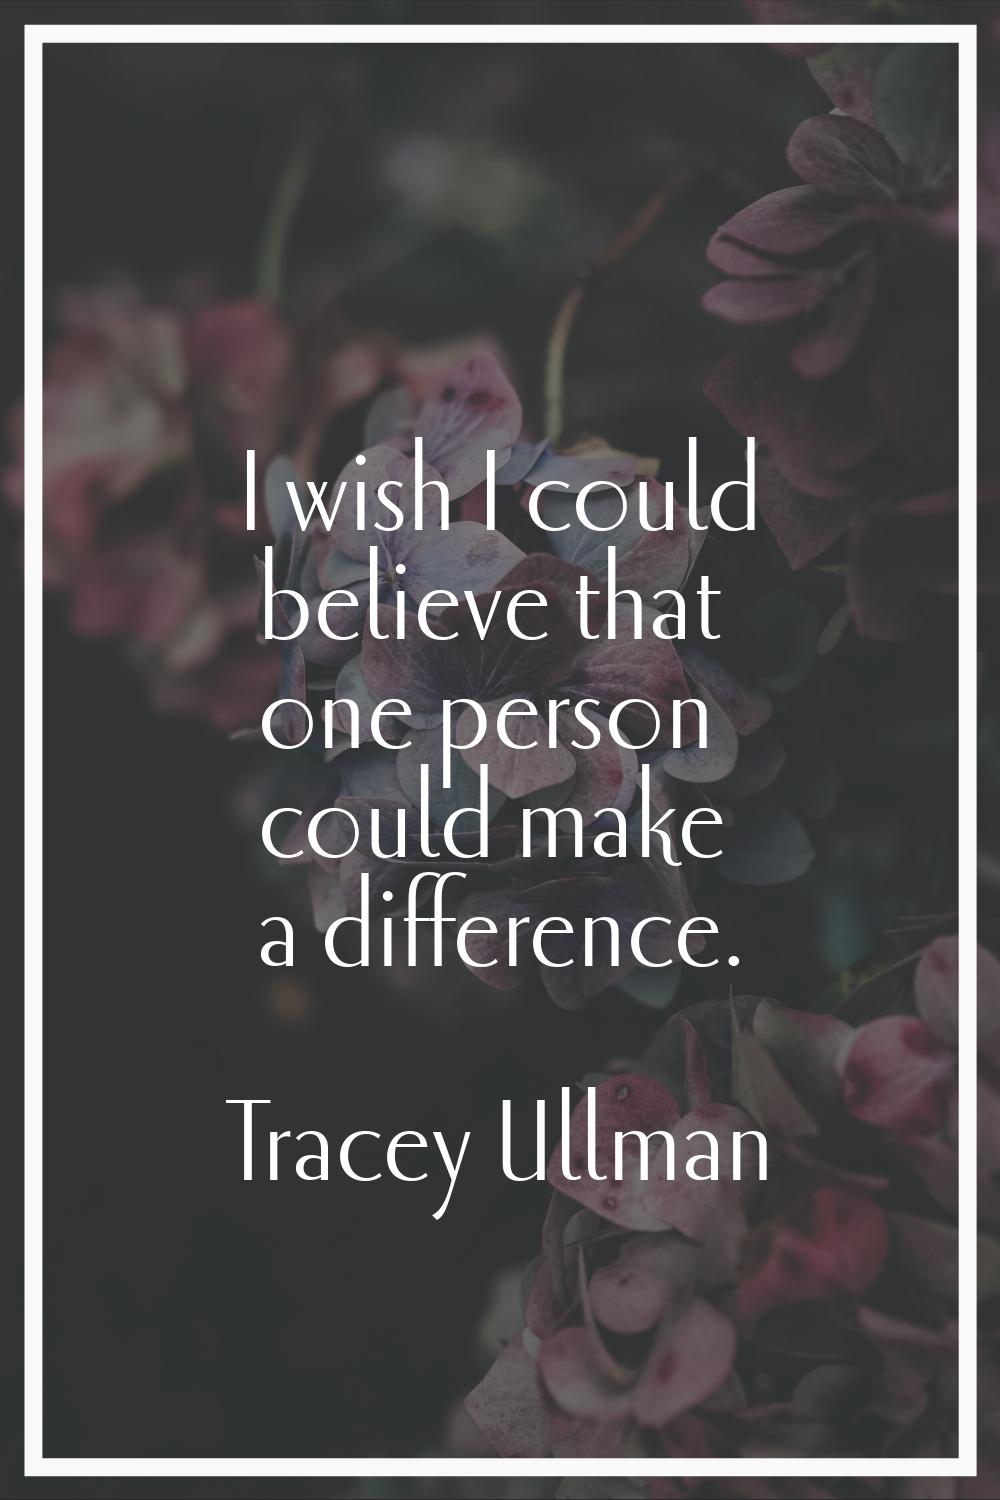 I wish I could believe that one person could make a difference.